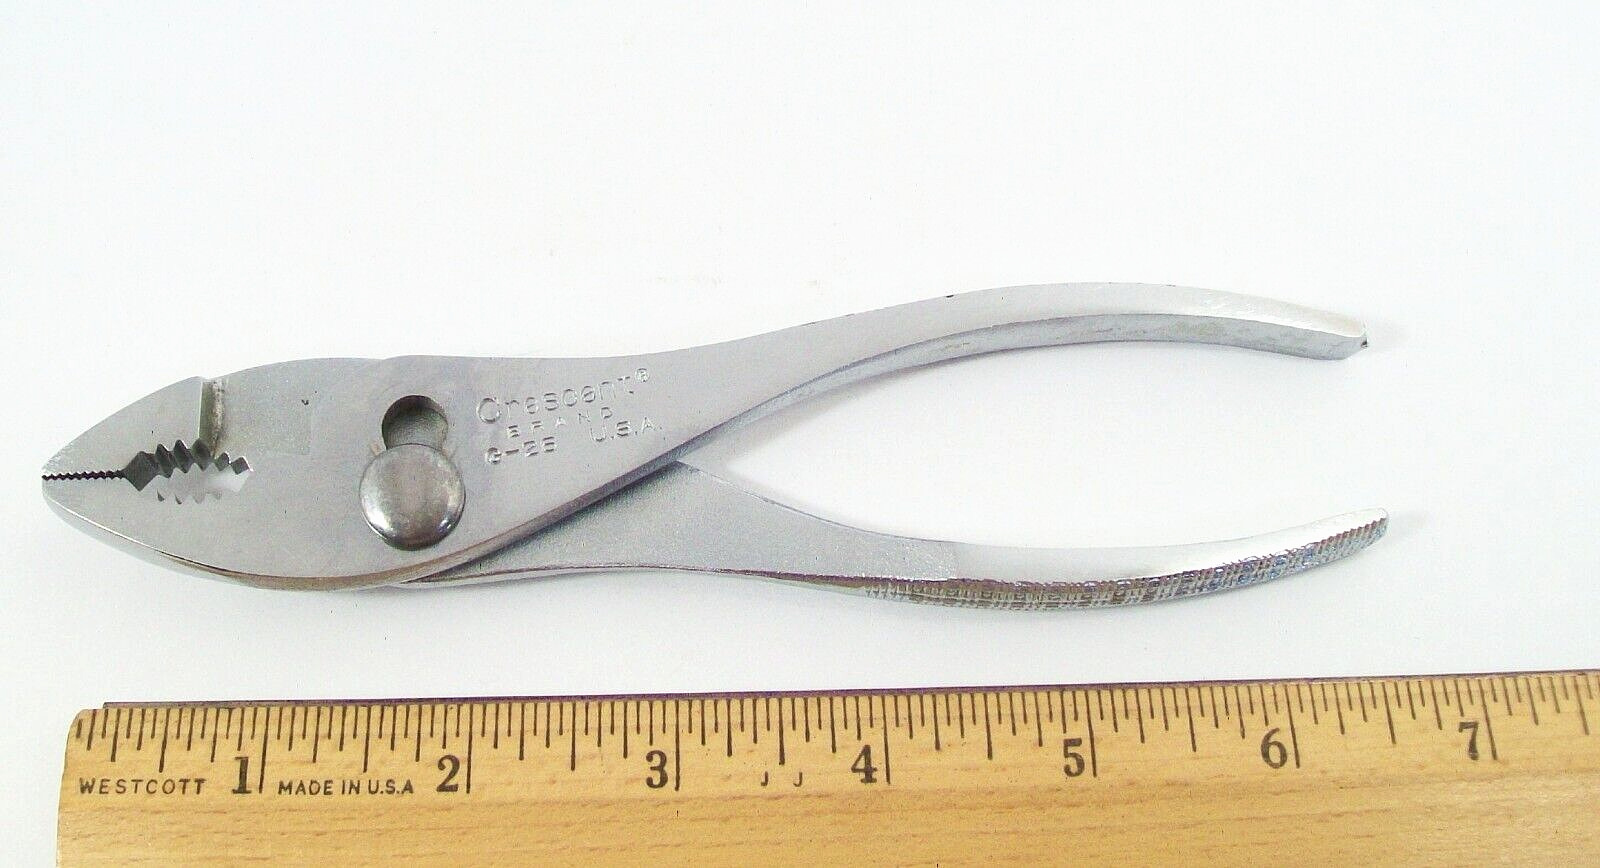 CRESCENT BRAND 6-1/2” MODEL G-26 SLIP JOINT PLIERS MADE IN THE USA